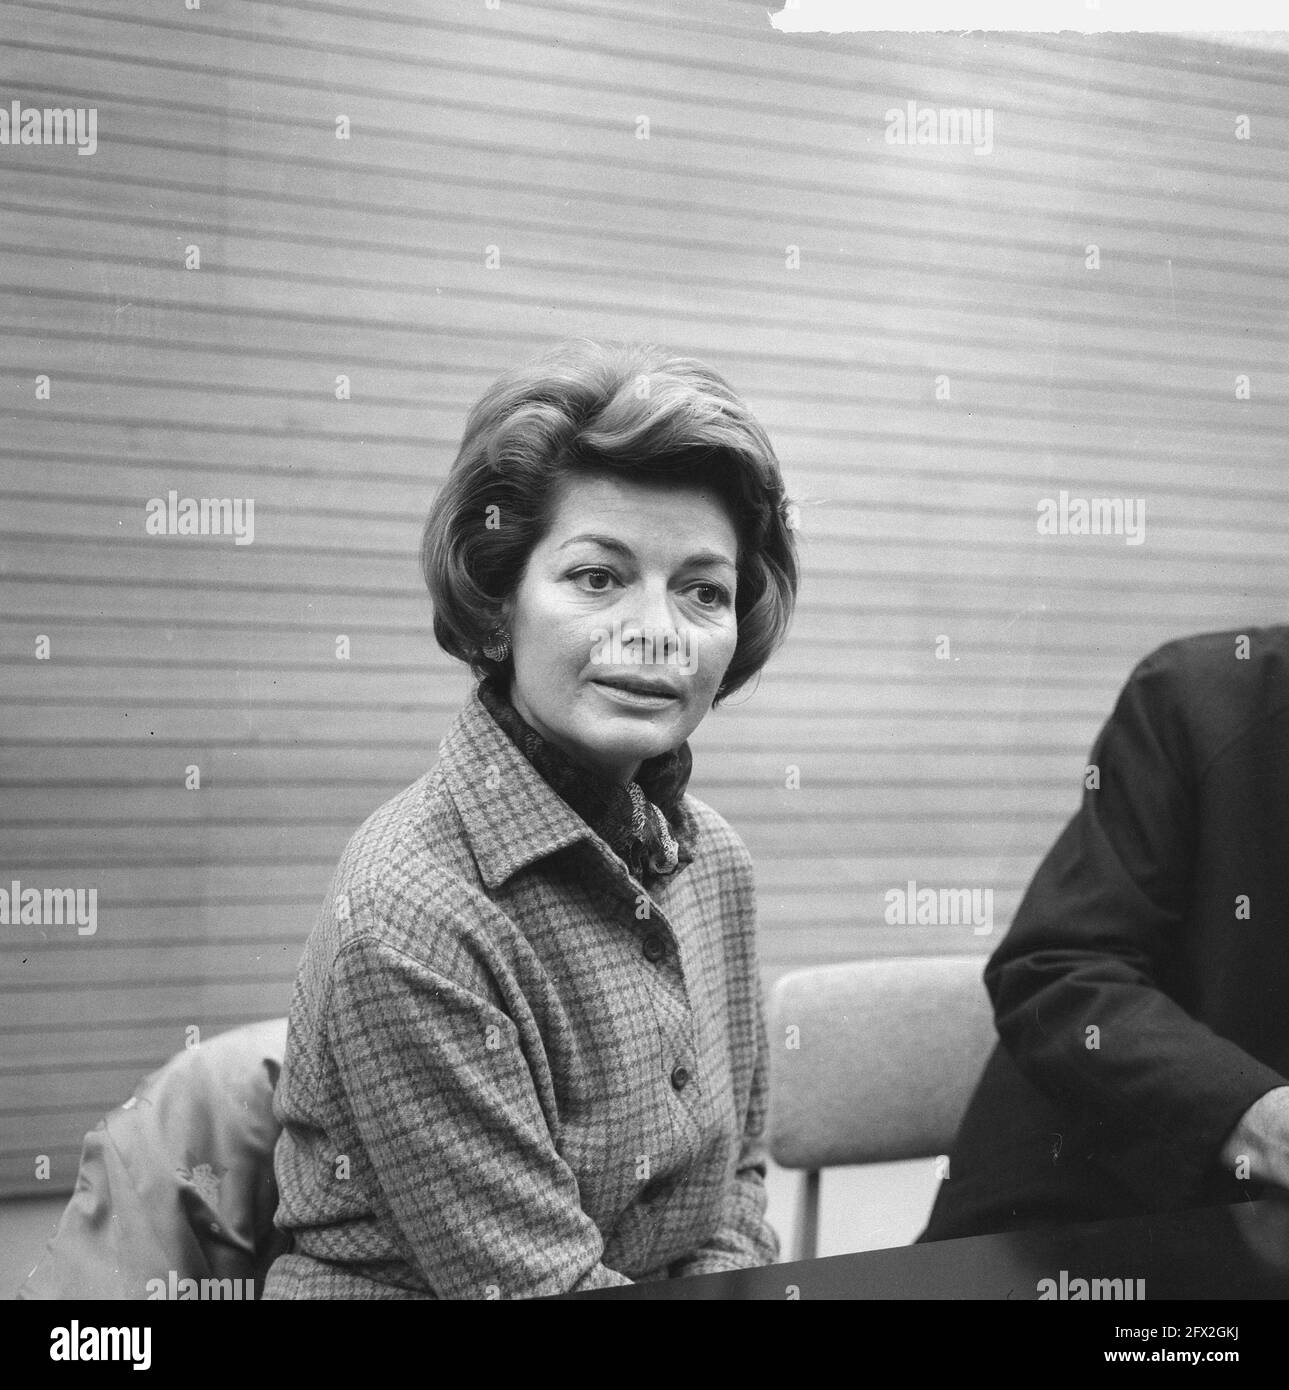 Lys Assia (singer) during press conference at Schiphol Airport (headline), December 4, 1964, press conferences, singers, The Netherlands, 20th century press agency photo, news to remember, documentary, historic photography 1945-1990, visual stories, human history of the Twentieth Century, capturing moments in time Stock Photo